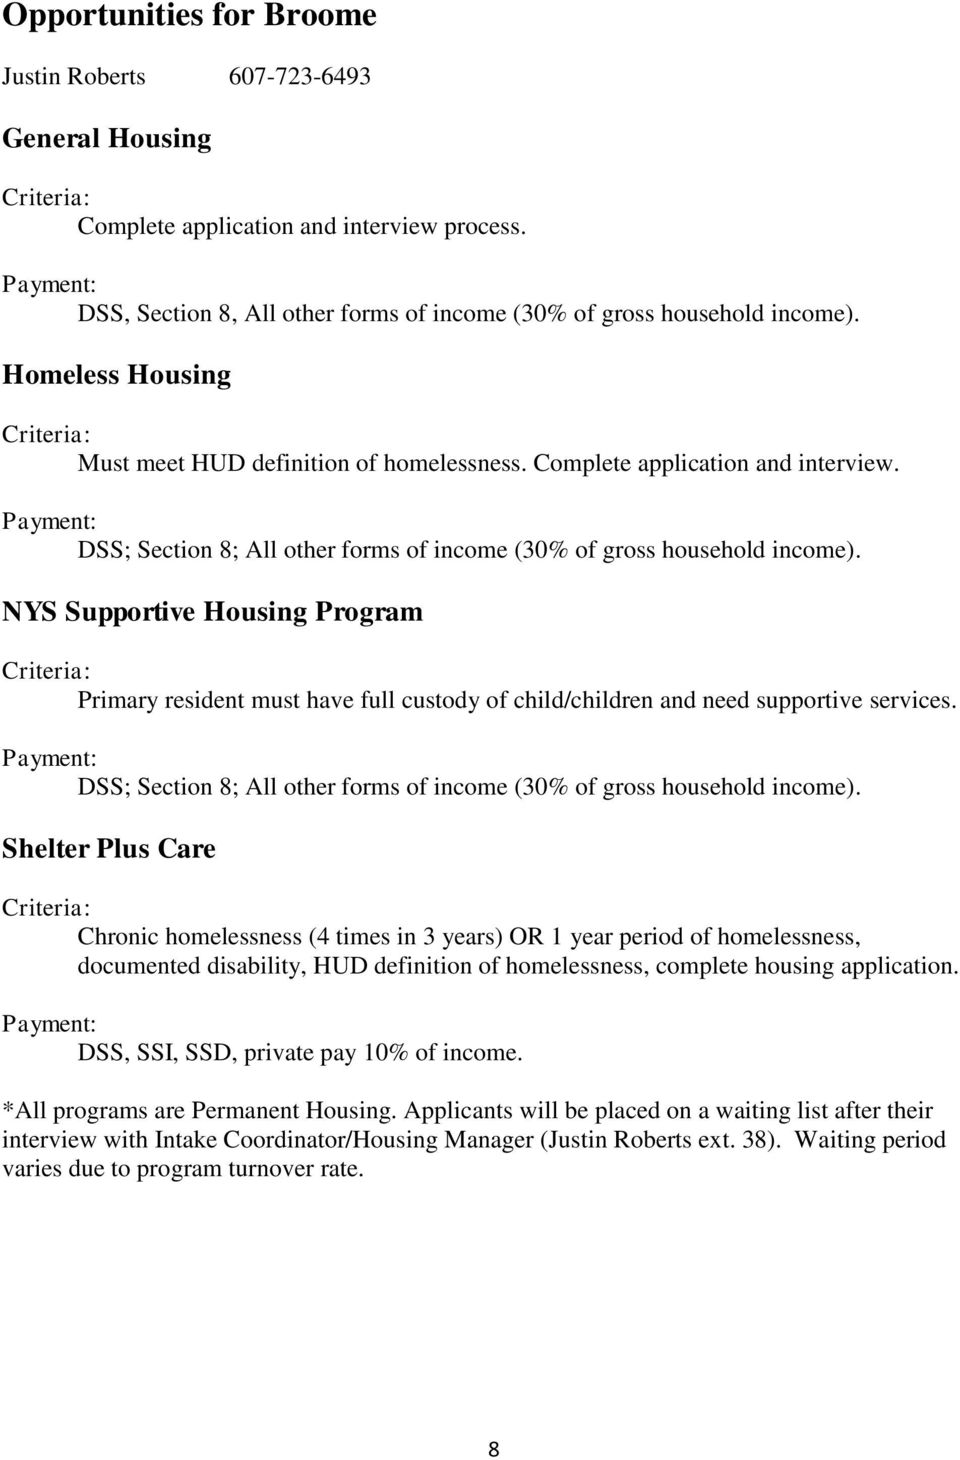 NYS Supportive Housing Program Primary resident must have full custody of child/children and need supportive services. DSS; Section 8; All other forms of income (30% of gross household income).